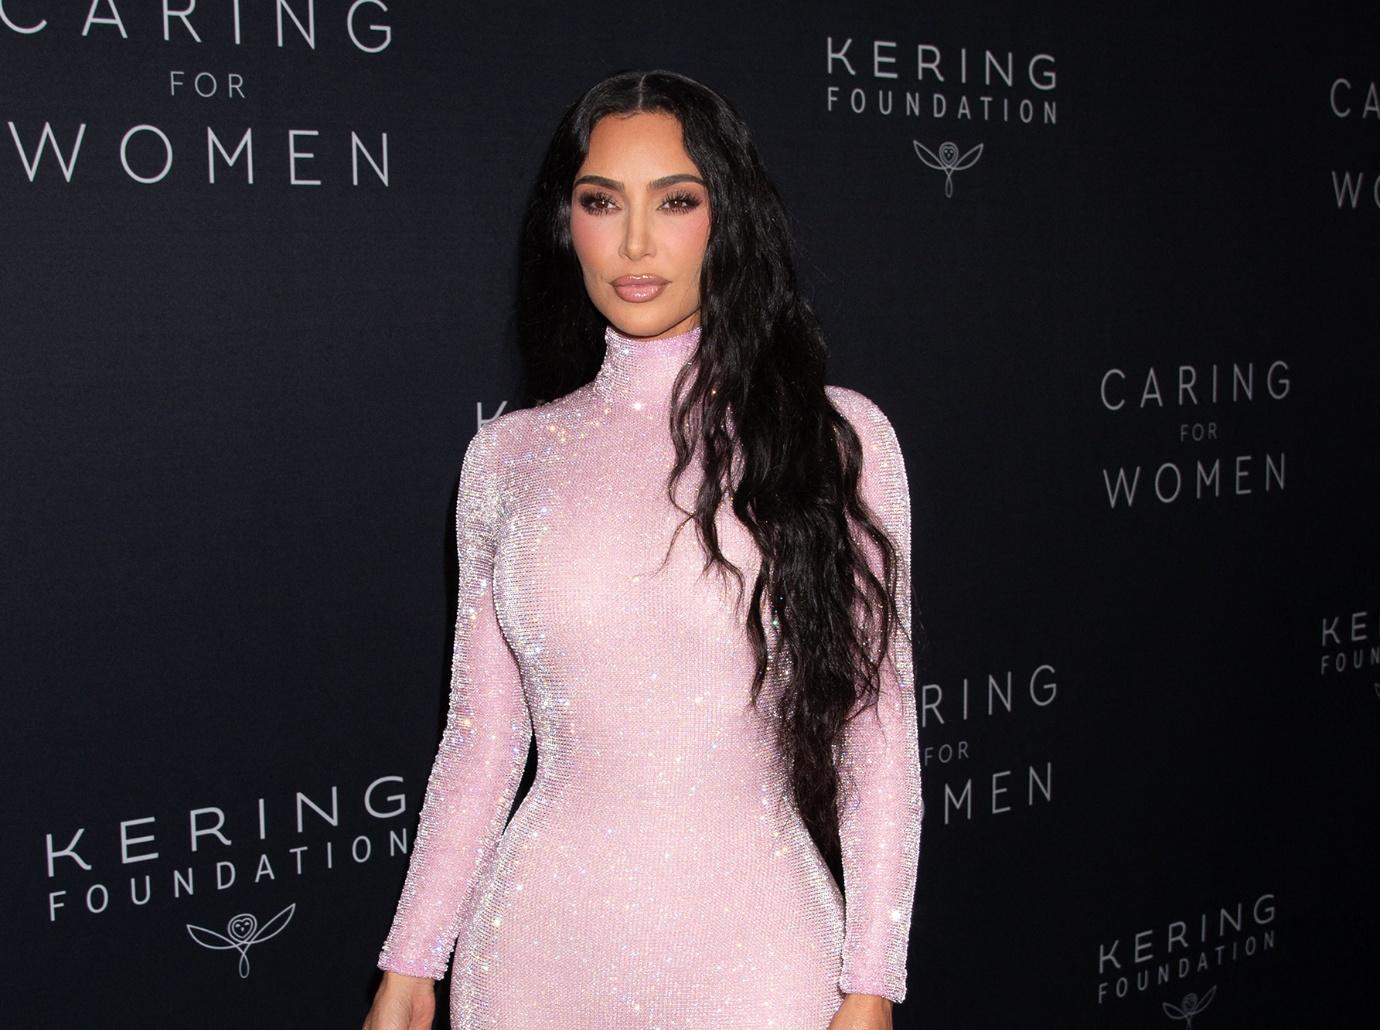 Kim Kardashian Slayed Her Way In A Pretty Pink One-Piece Outfit For NBC's  Saturday Night Live